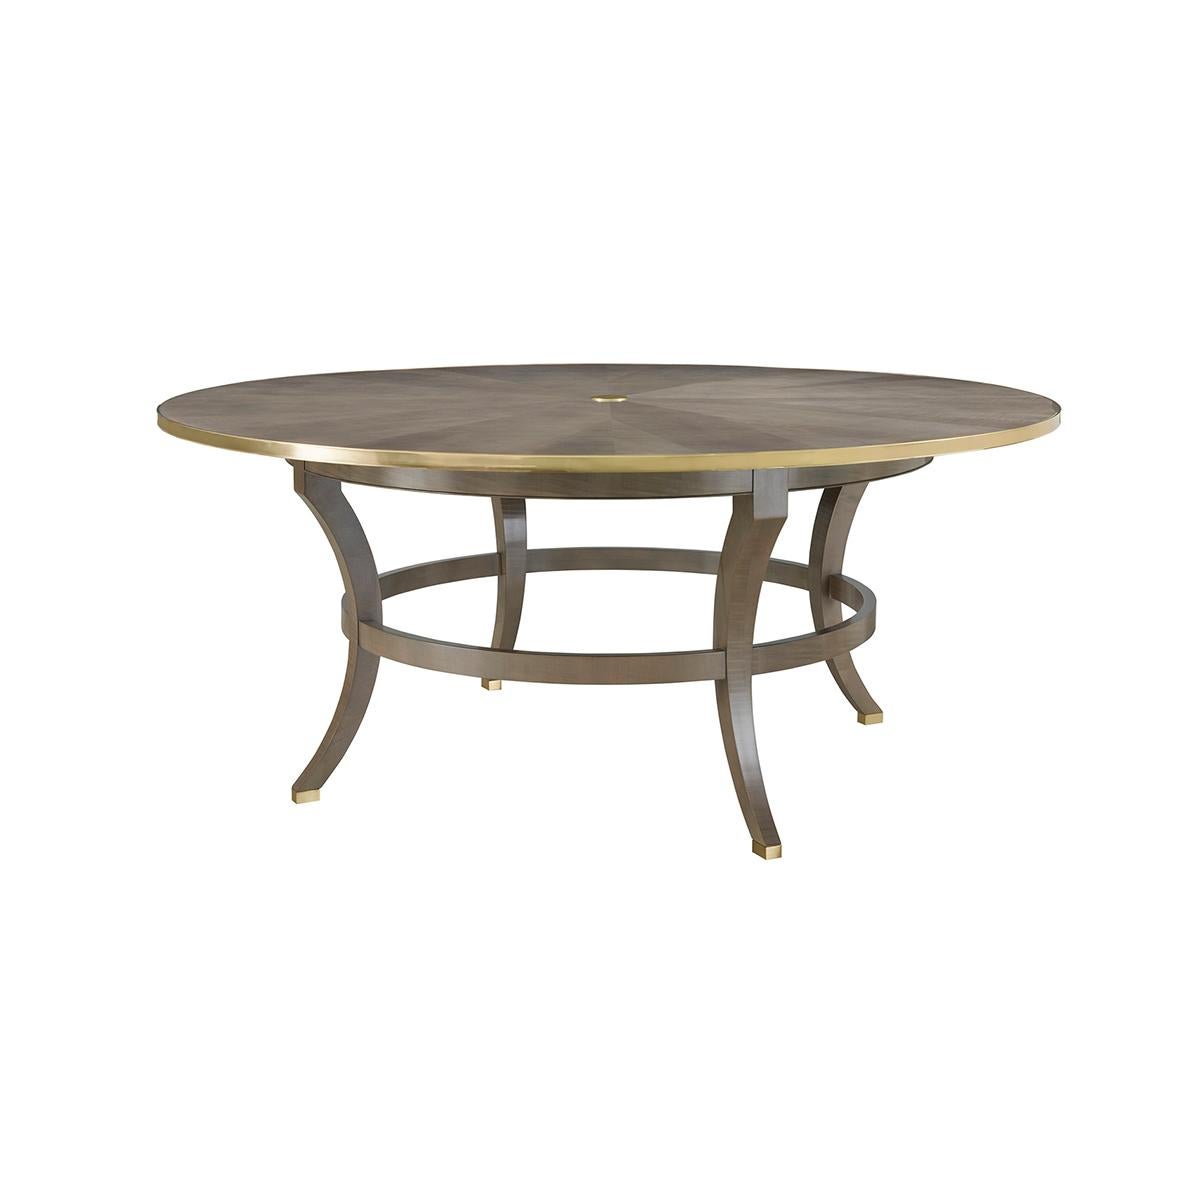 An Art Deco round dining table. Greyed Sycamore veneers with a rayed inlaid top, a solid brass central applique and brass trim molding. Raised on four sabre form legs with a round stretcher and brass feet.

Dimensions: 72